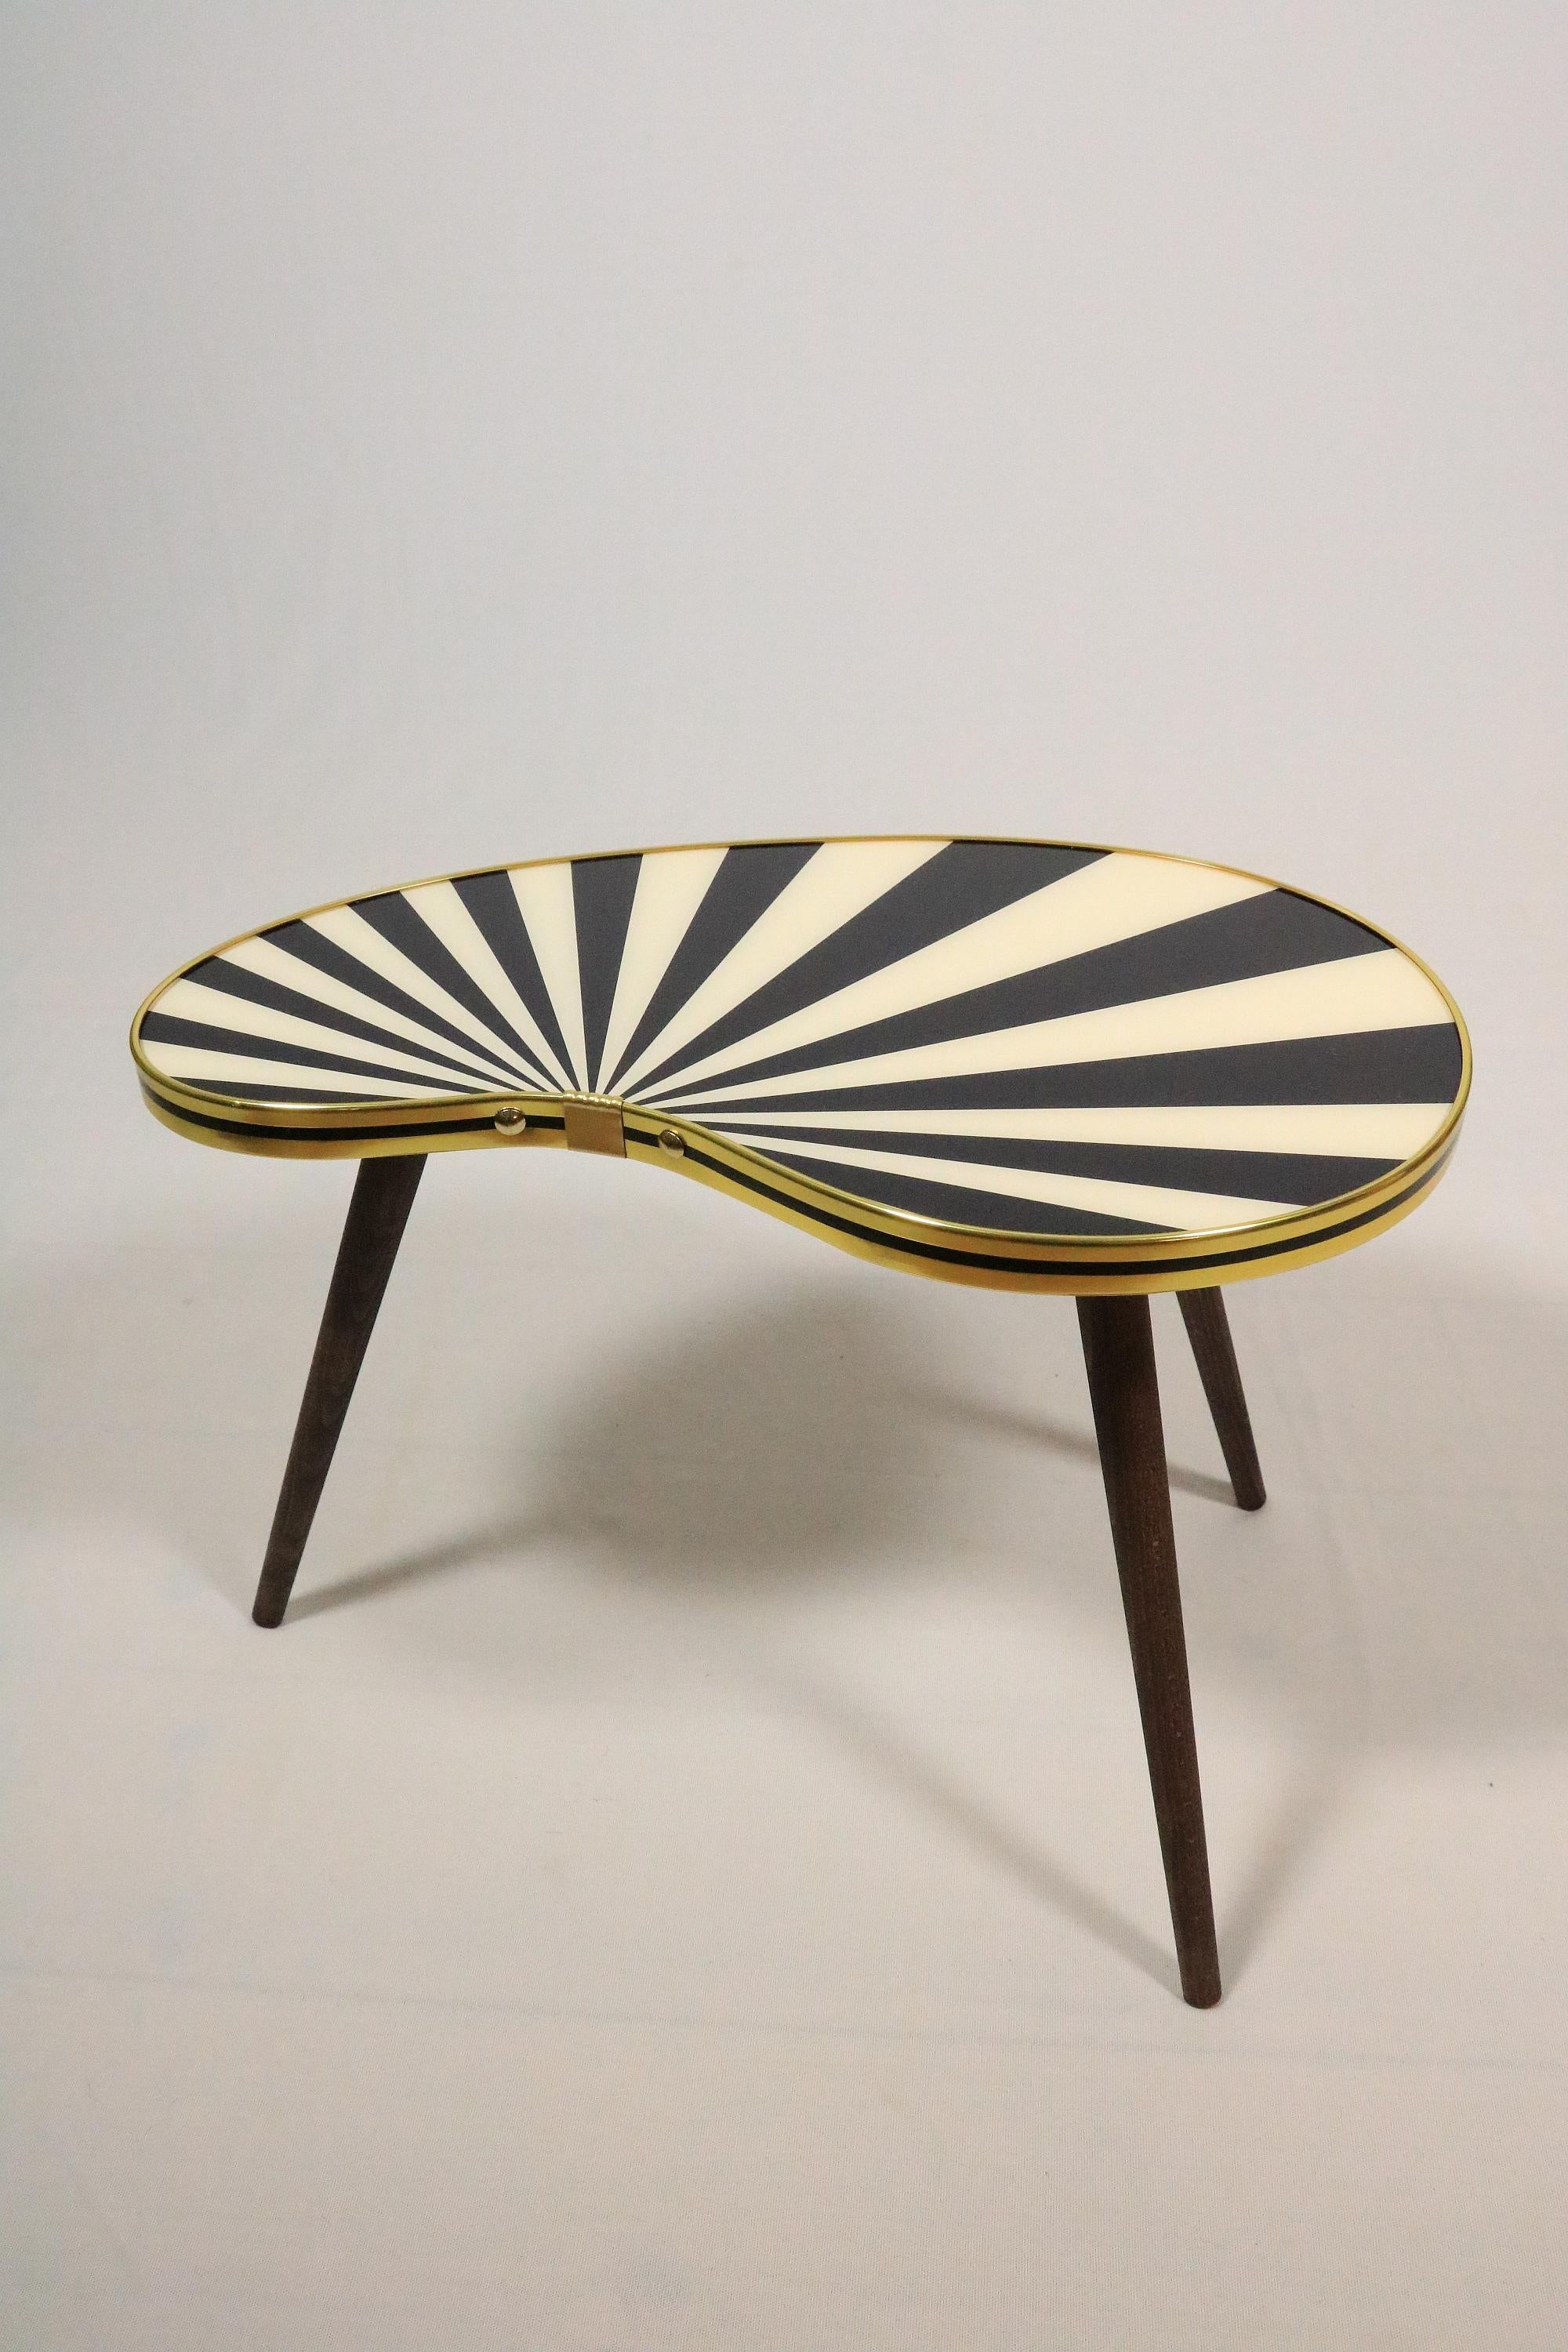 Exclusive offer of one small kidney shaped side table. 
Very decorative in black-white colored stripes (see other offers: optional in 4 different colours and patterns avaiable).

These tables are a high-quality new production after original models